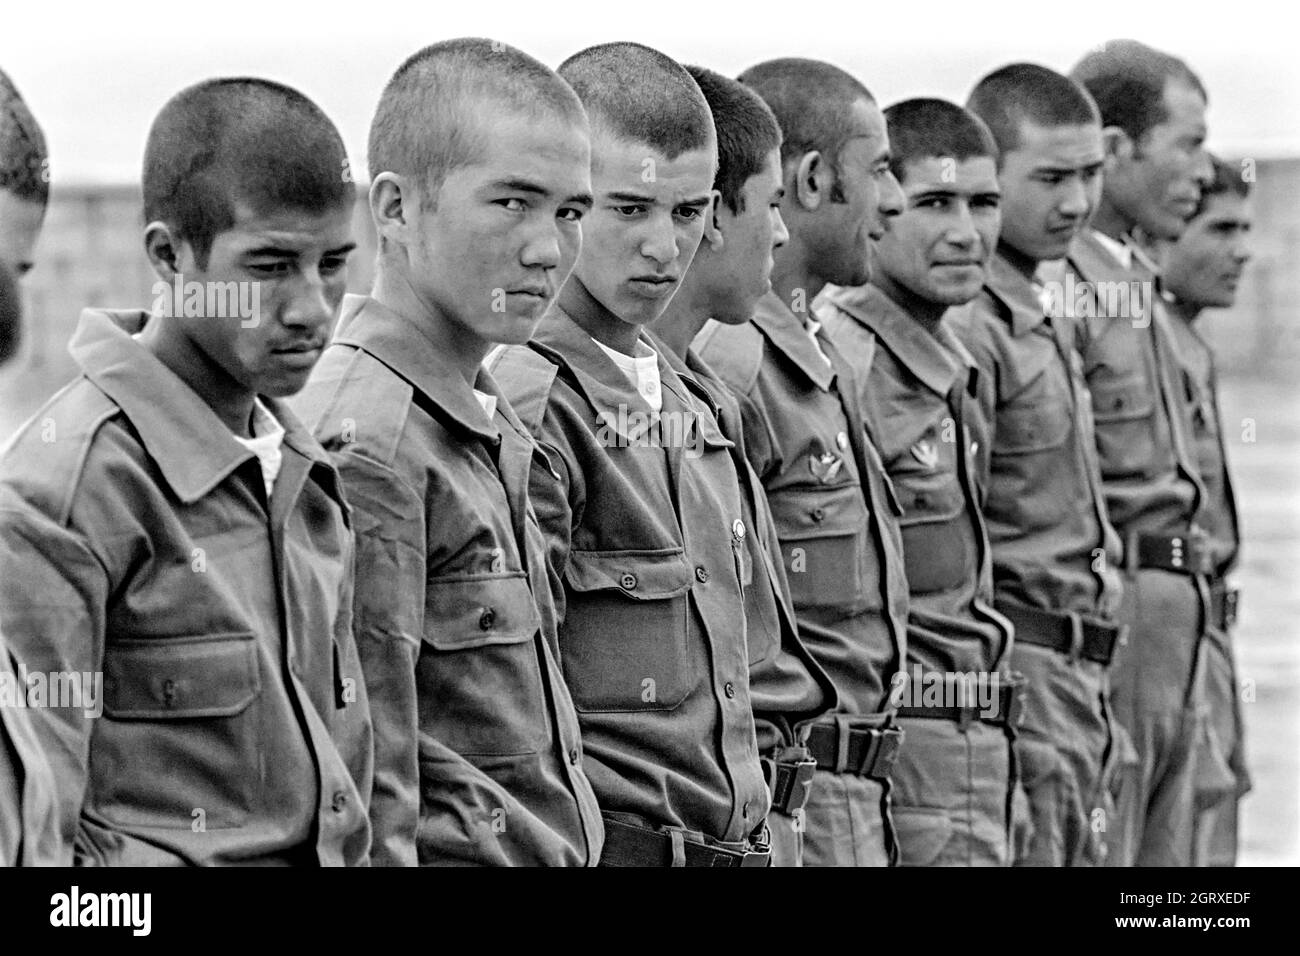 KABUL, AFGHANISTAN. 30th April 1988. Young Afghan recruits watch a presentation on folding a parachute, at the number 59 Military Technical center April 30, 1988 outside Kabul, Afghanistan. The boys, ages between 13 and 18 have been drafted into the army to fight against the mujahideen. Stock Photo